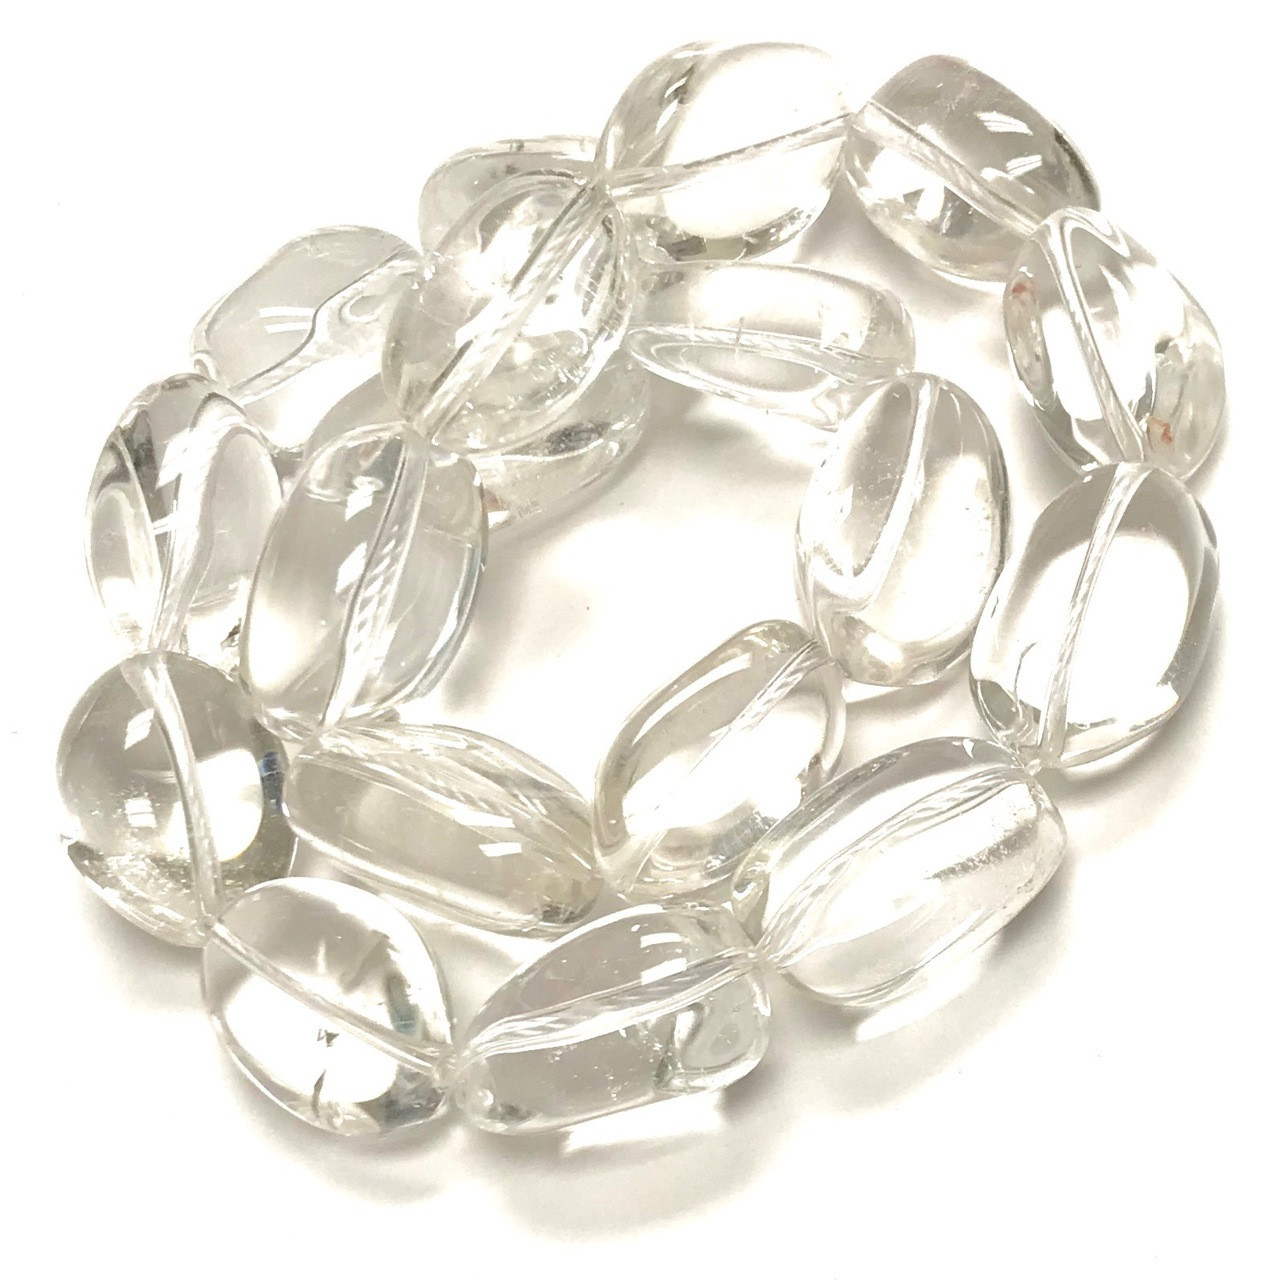 Lot of 12 Large Clear/Cloudy White Gemstone/Rock Beads, 1 inch